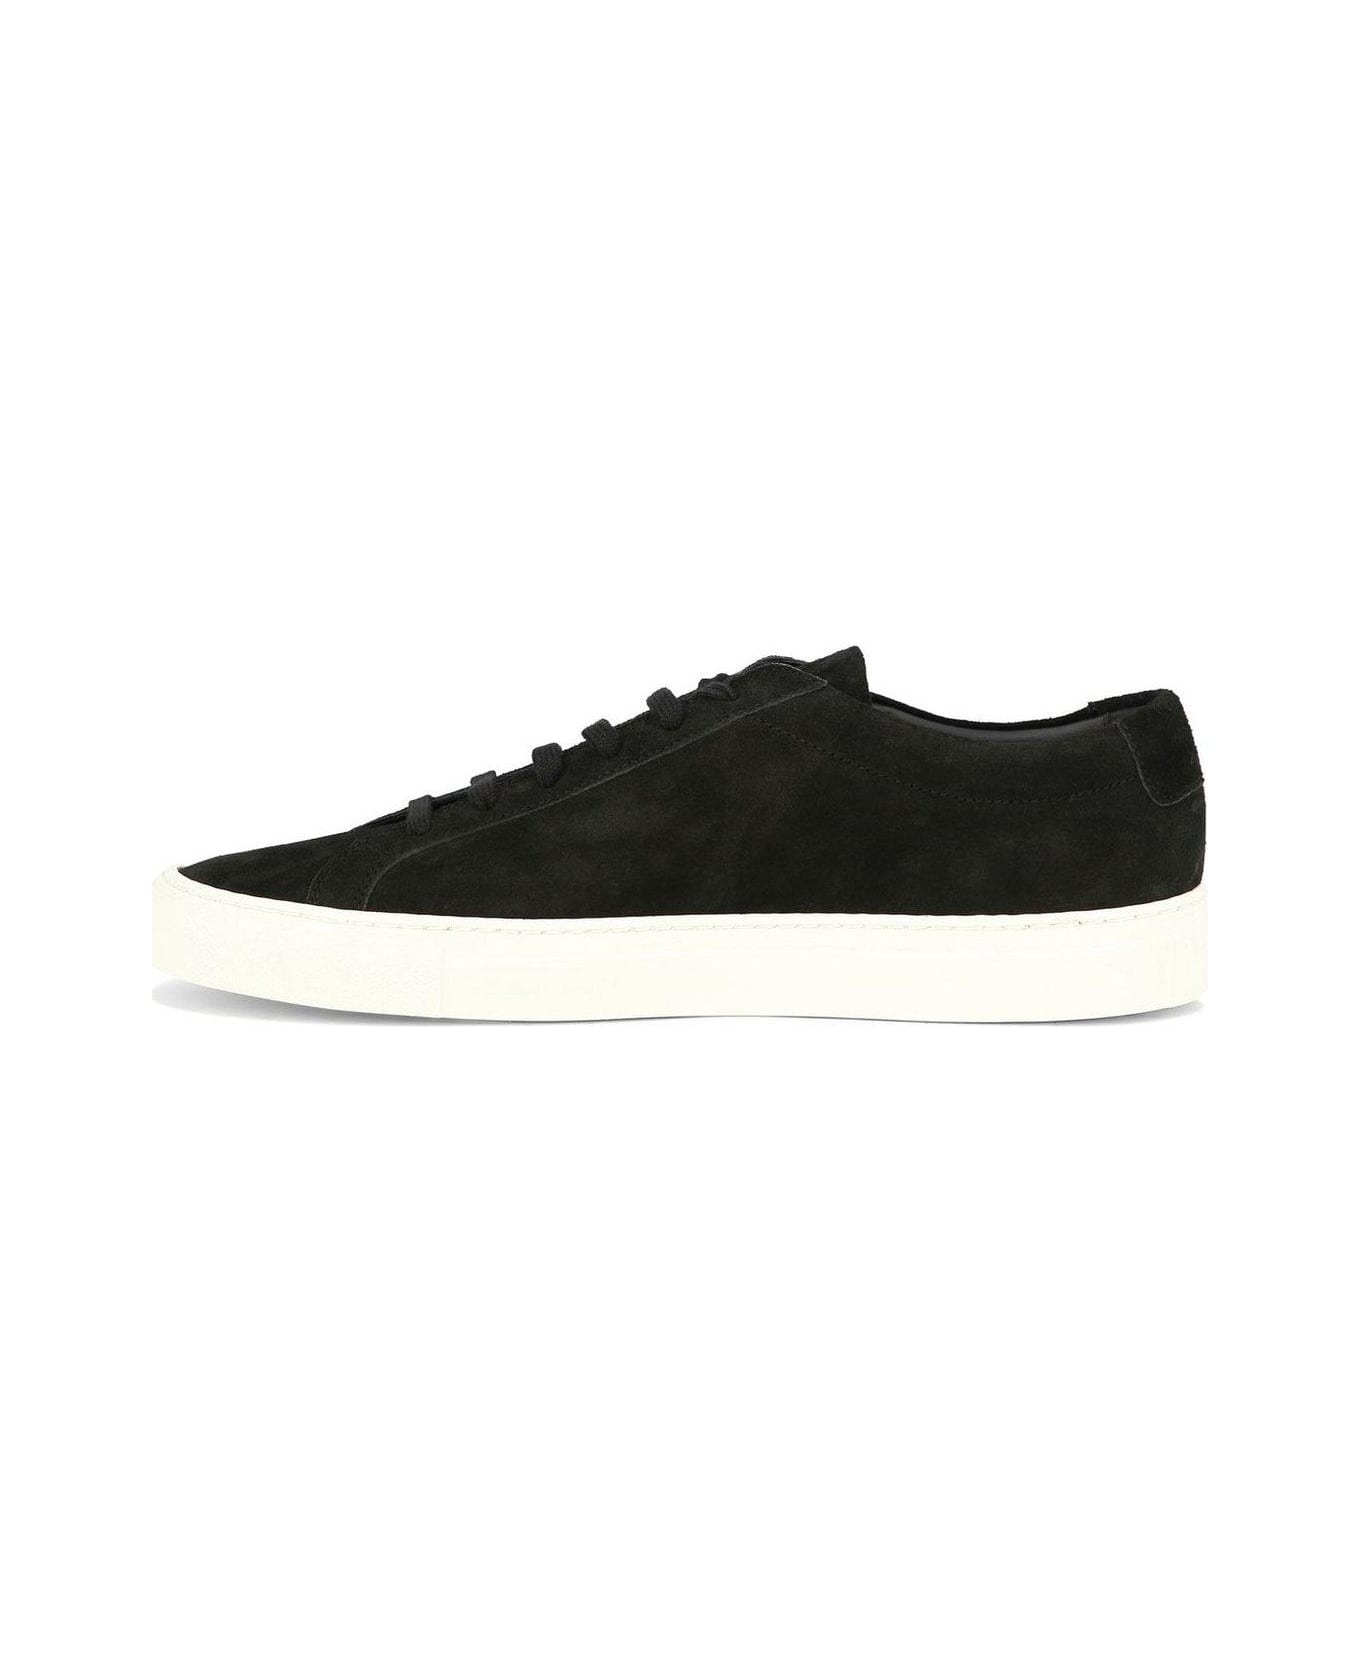 Common Projects Achilles Sneakers In Black Suede - Black スニーカー